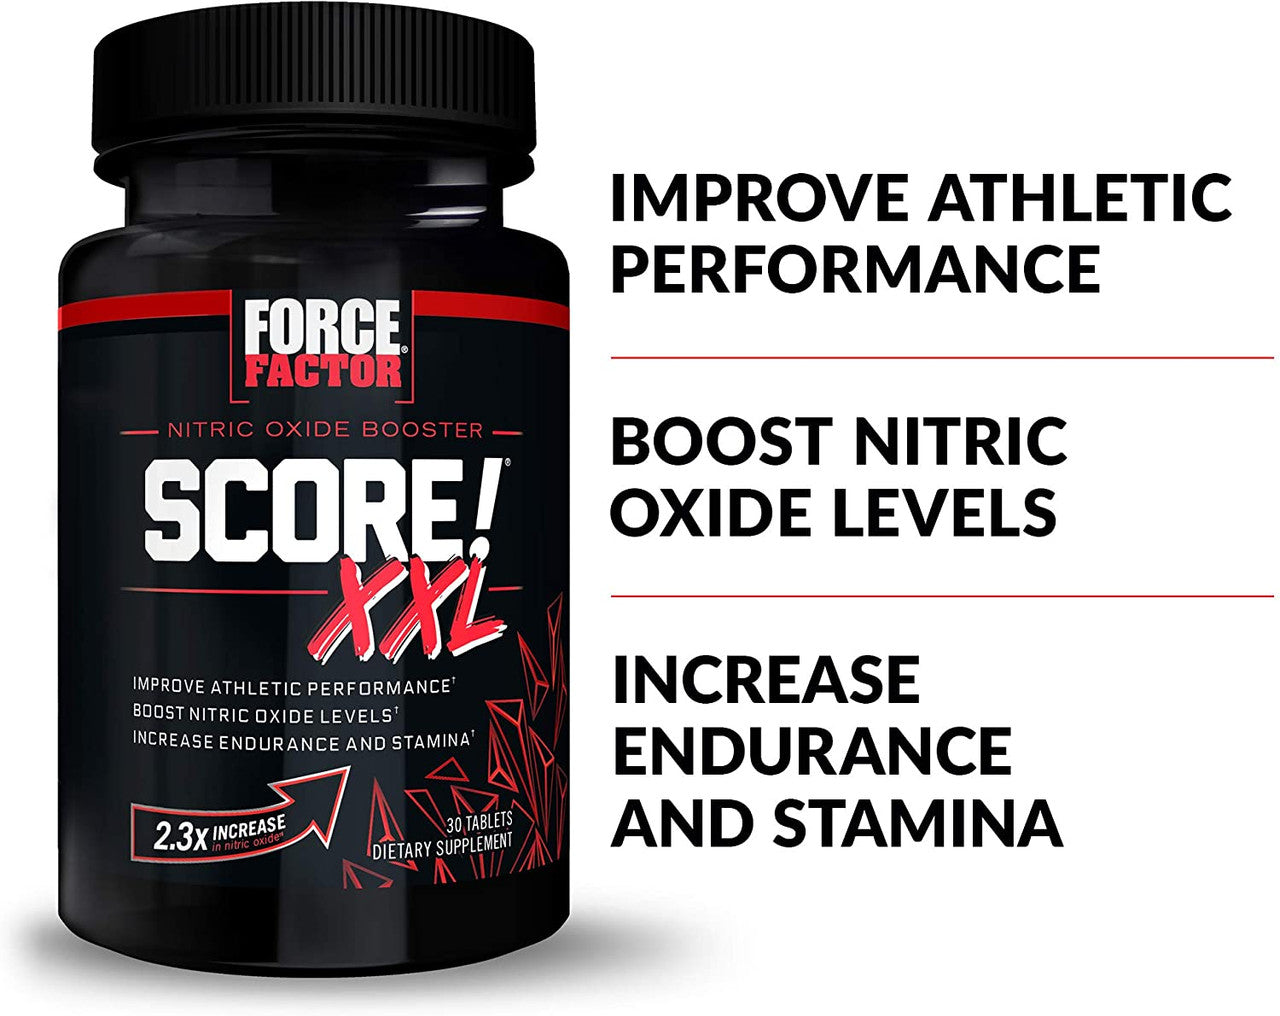 Force Factor Score! XXL usages